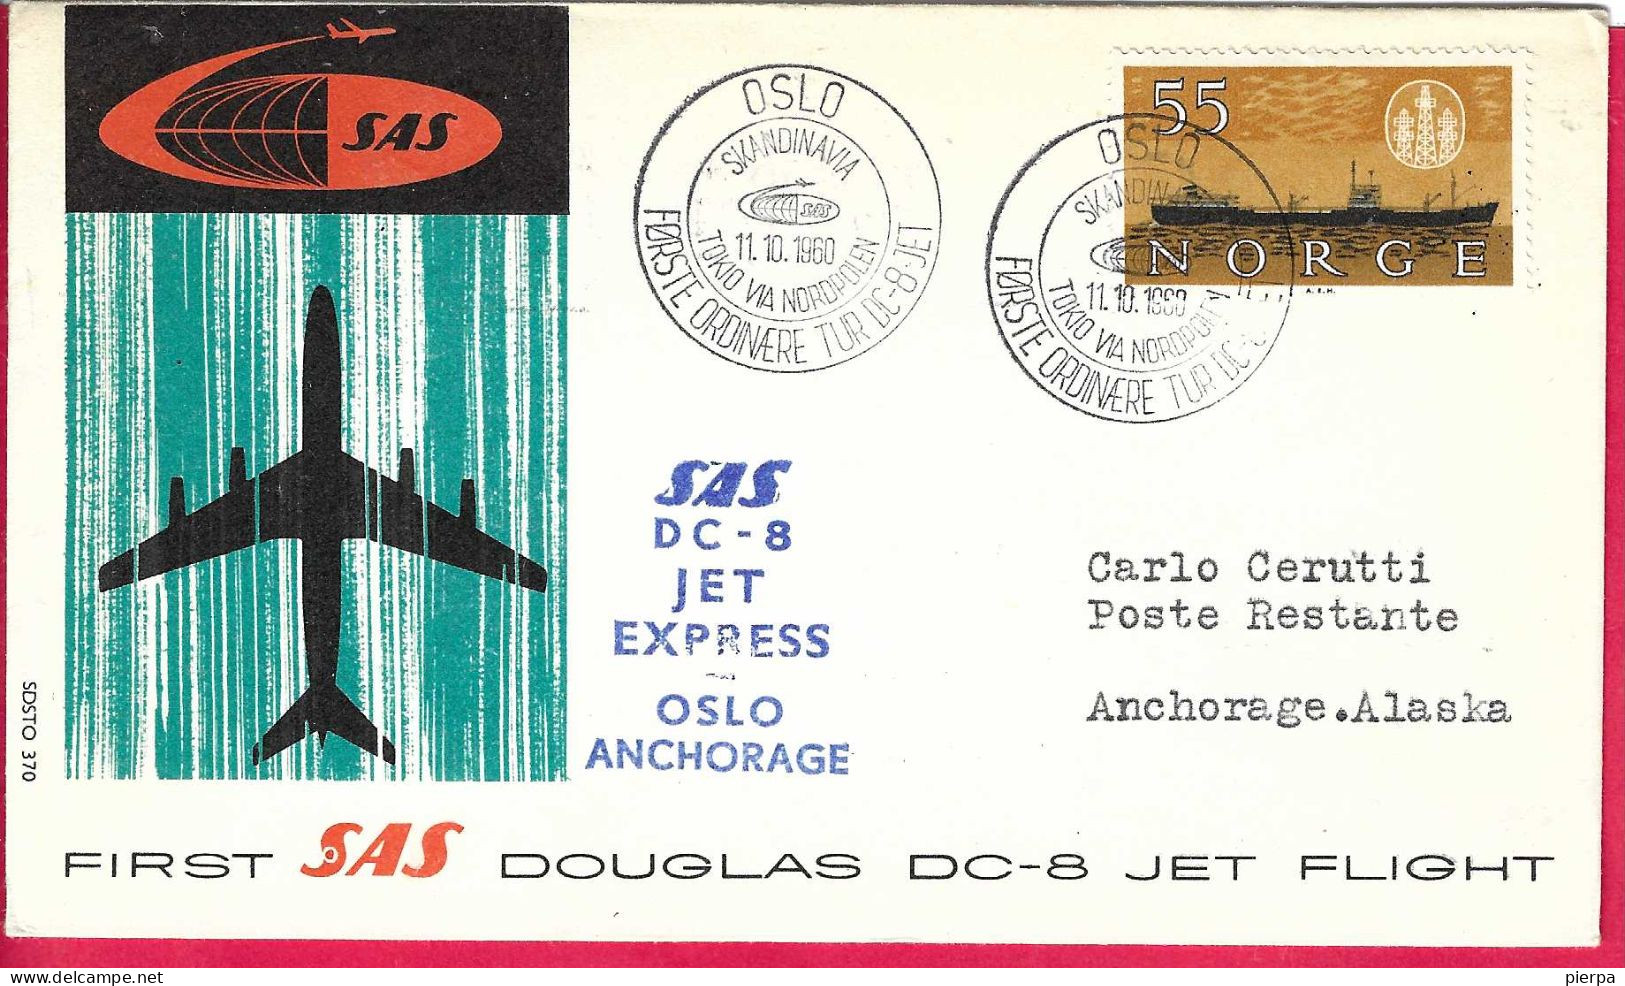 NORGE - FIRST DOUGLAS DC-8 FLIGHT - SAS - FROM OSLO TO ANCHORAGE *11.10.60* ON OFFICIAL COVER - Lettres & Documents